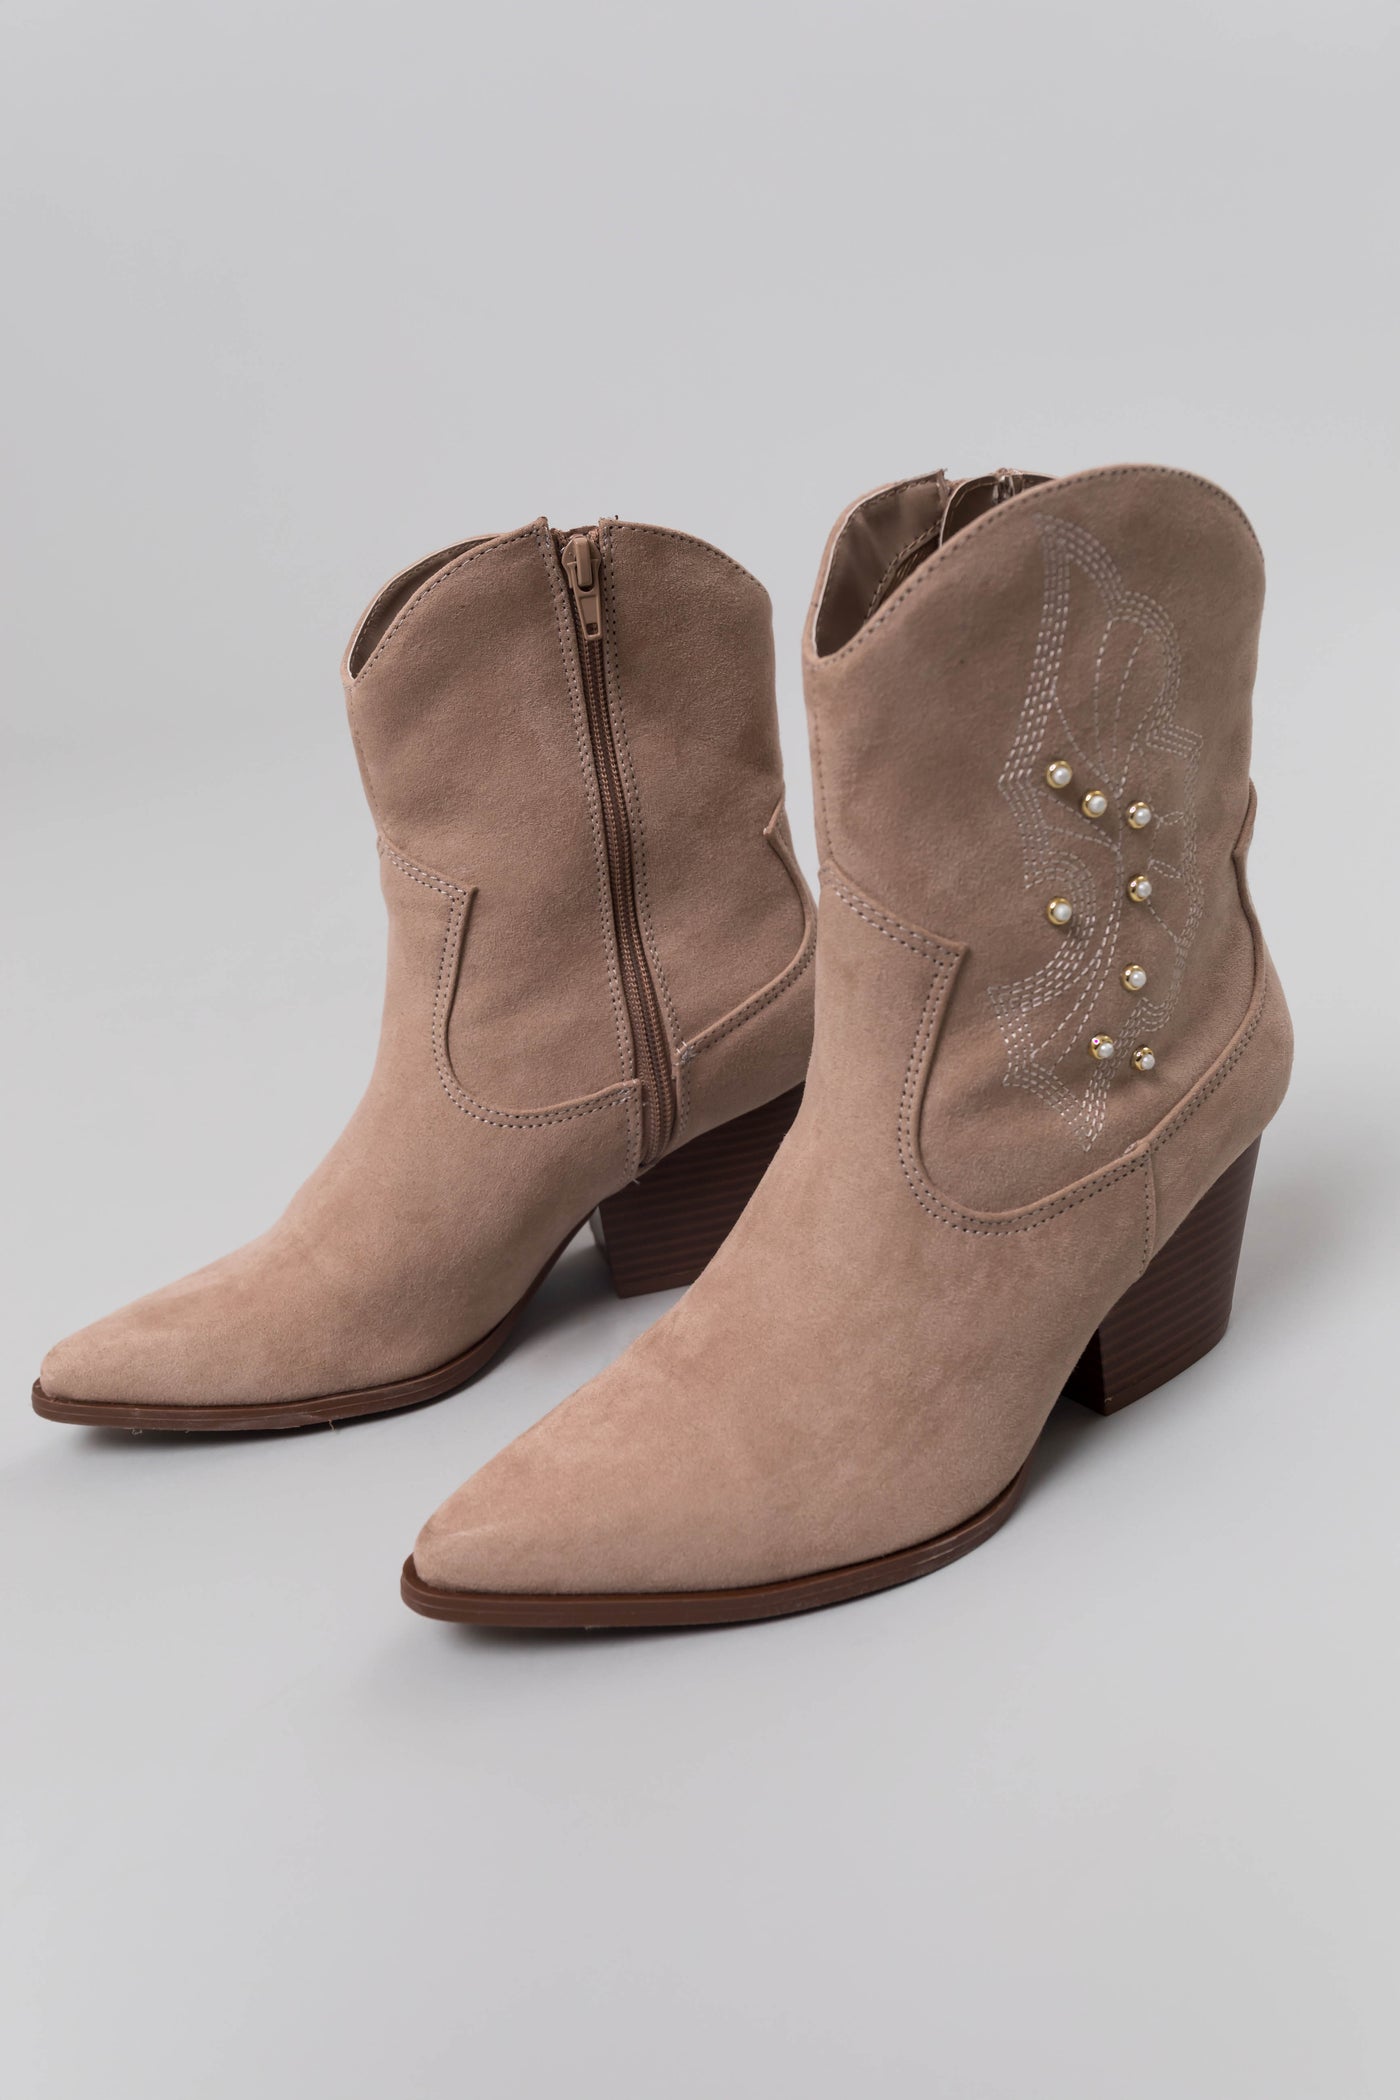 Latte Suede Studded Western Style Booties